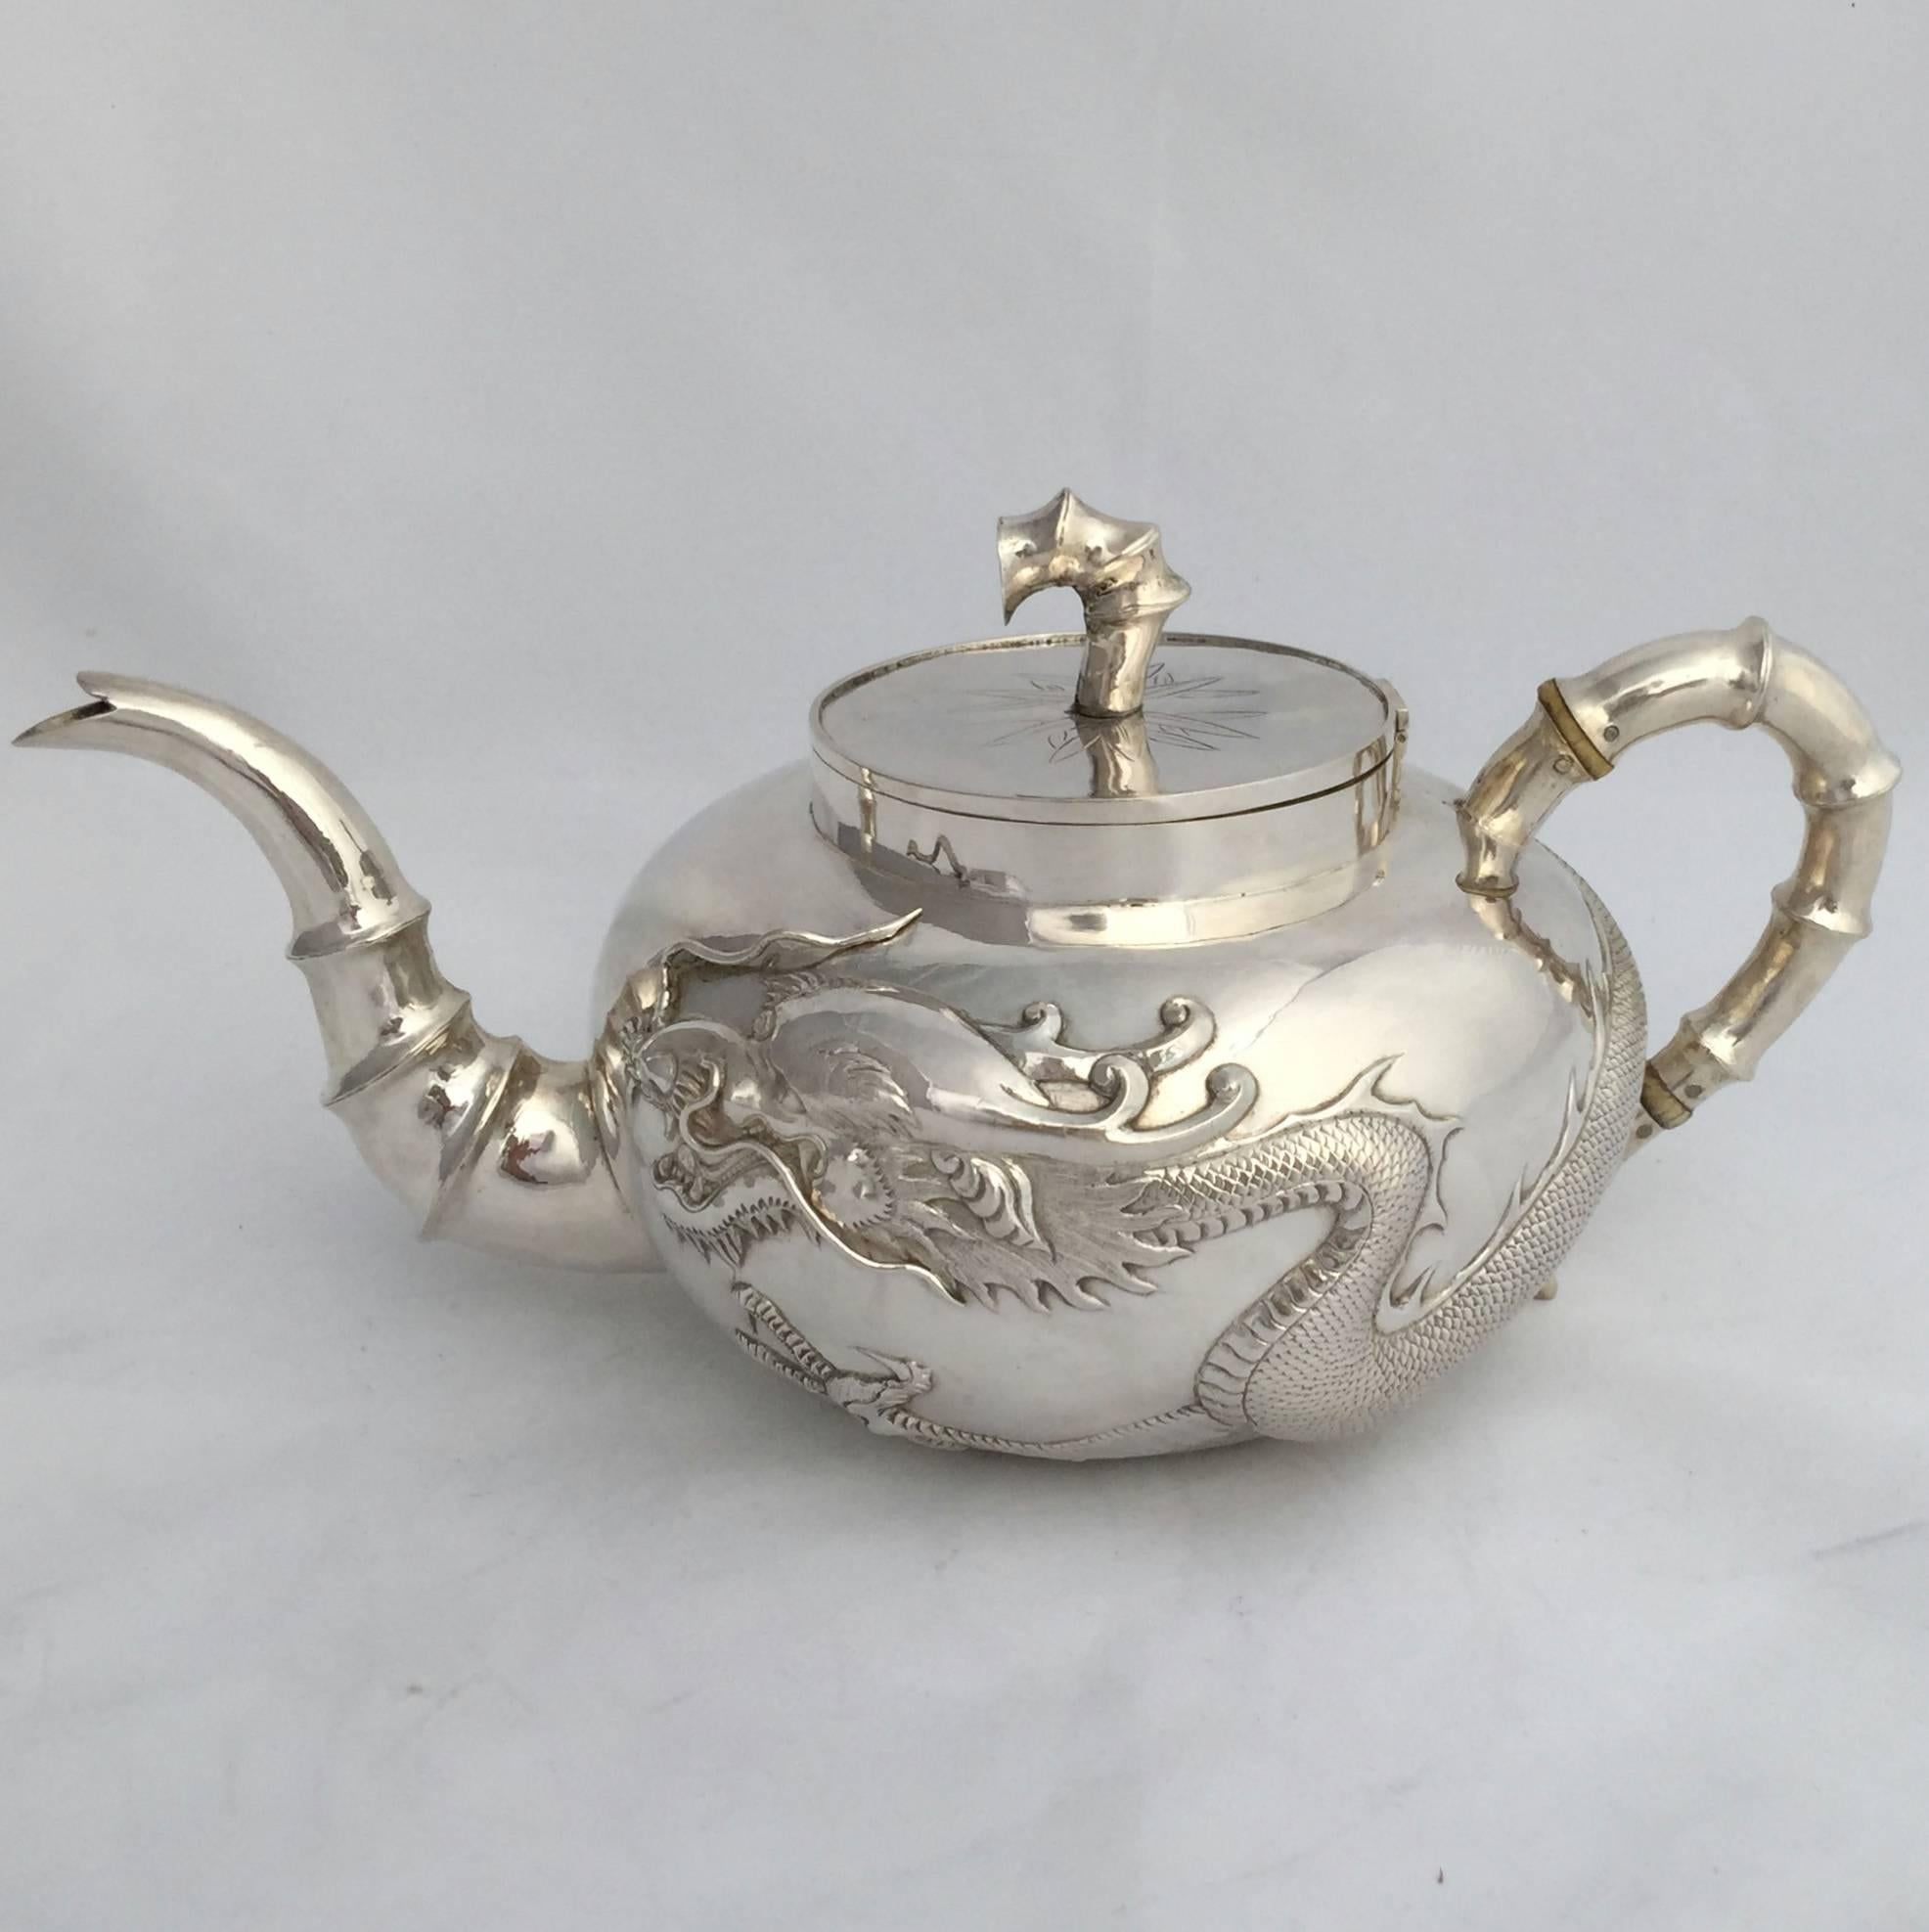 Repoussé Late 19th Century Chinese Export Three-Piece Dragon Tea Set by Kuen Wo For Sale